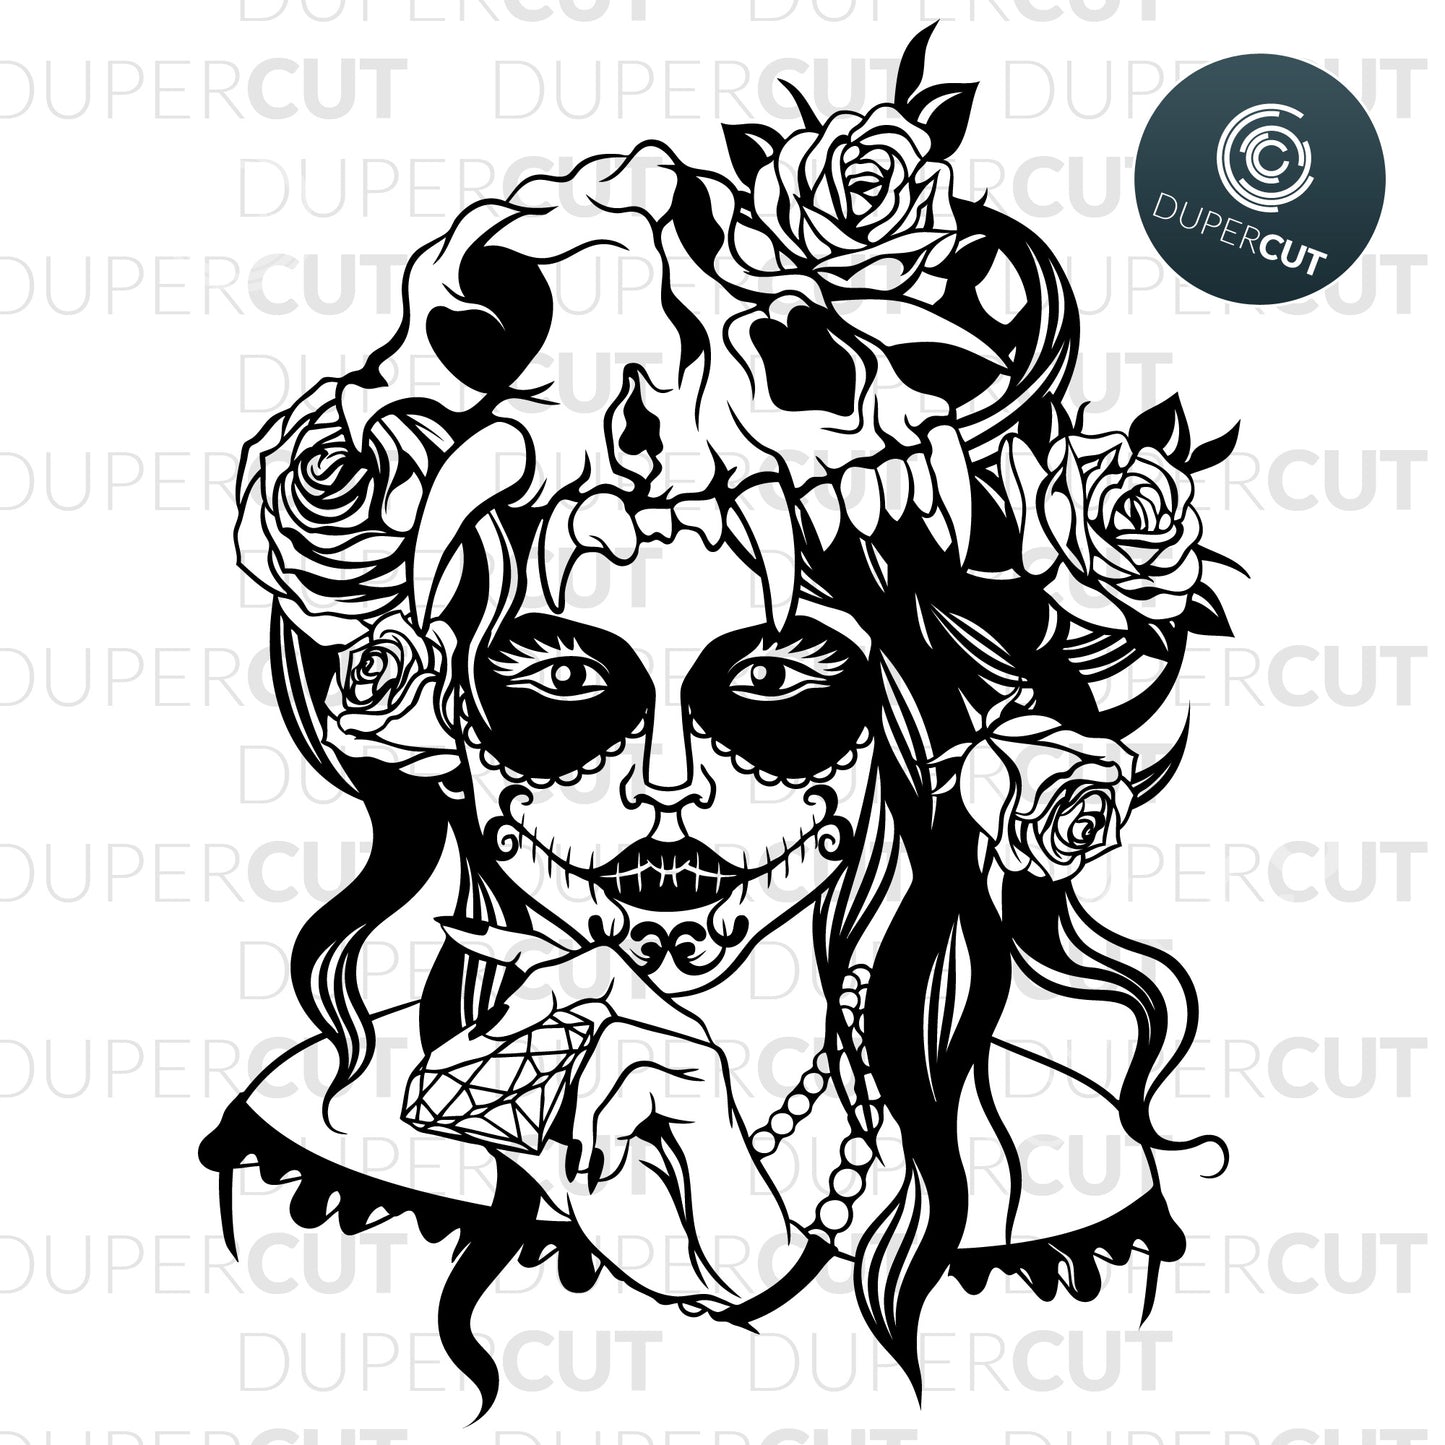 Girl sugar skull with roses and diamond, black line art tattoo  template - SVG DXF PNG files for Cricut, Glowforge, Silhouette Cameo, CNC Machines